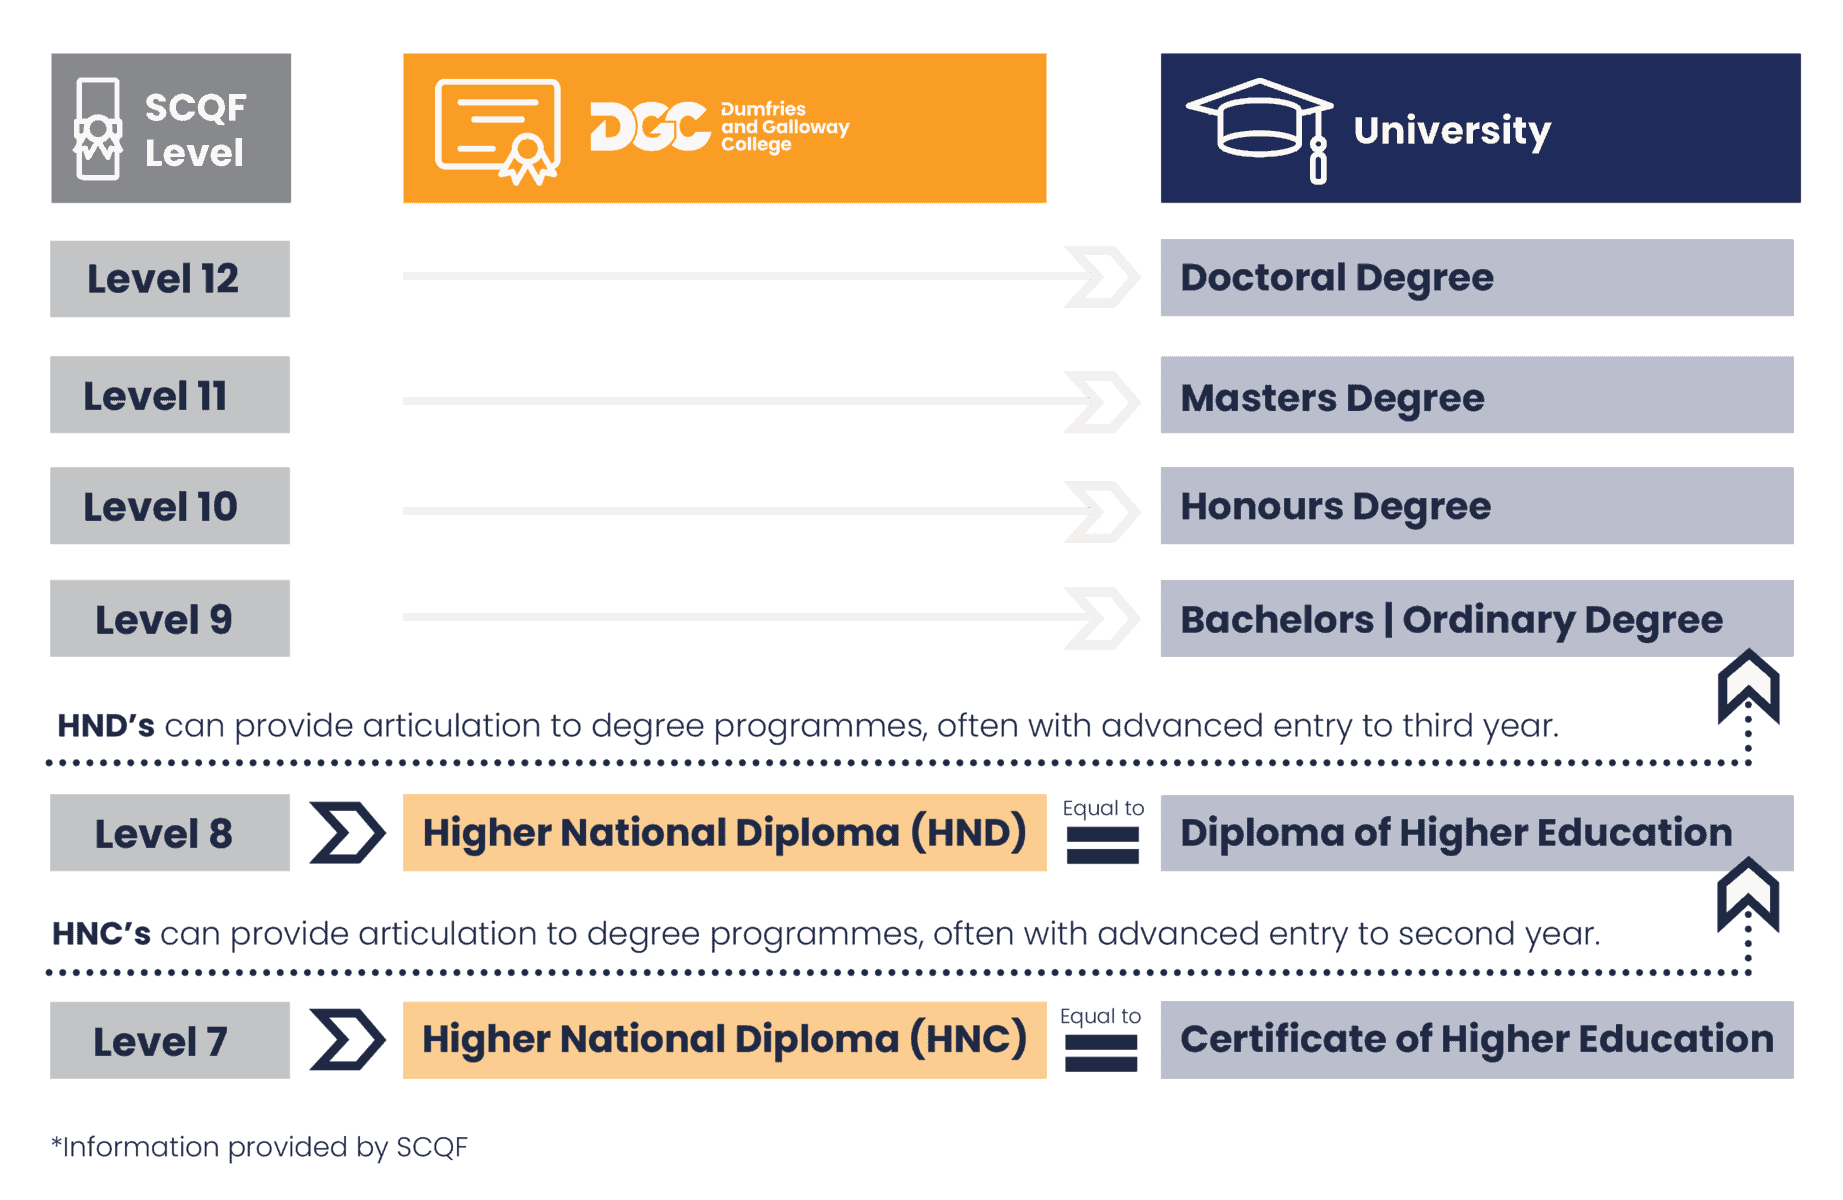 HND's can provide articulation to degree programmes often with advanced entry to third year. 

HNC's can provide articulation to degree programmes often with advanced entry to second year.